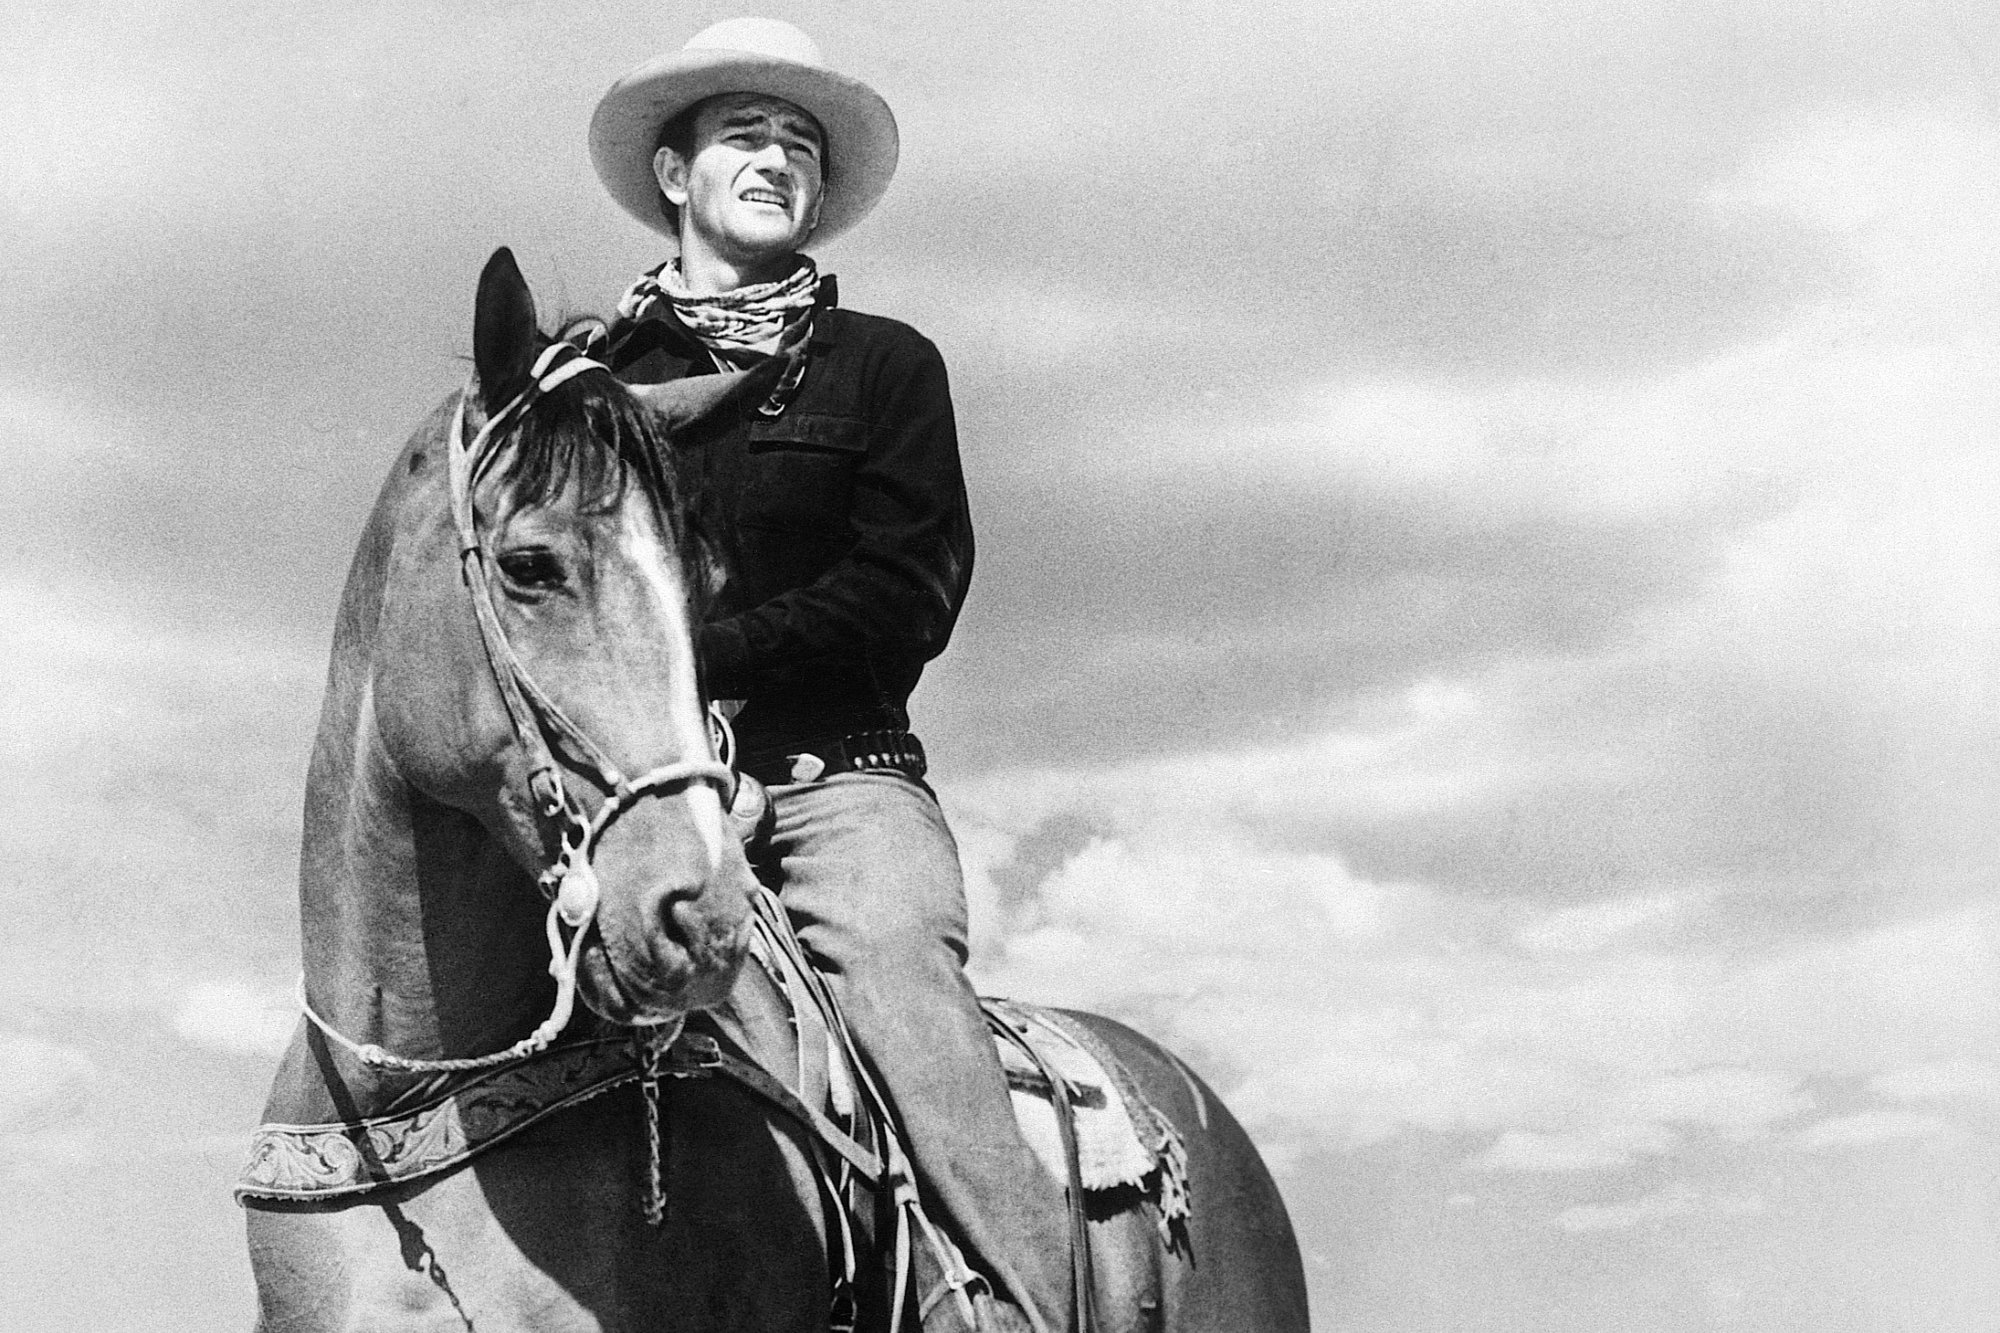 John Wayne starring in one of his Western movies. He's wearing a Western costume and cowboy hat in a black-and-white photo. He's riding a horse.